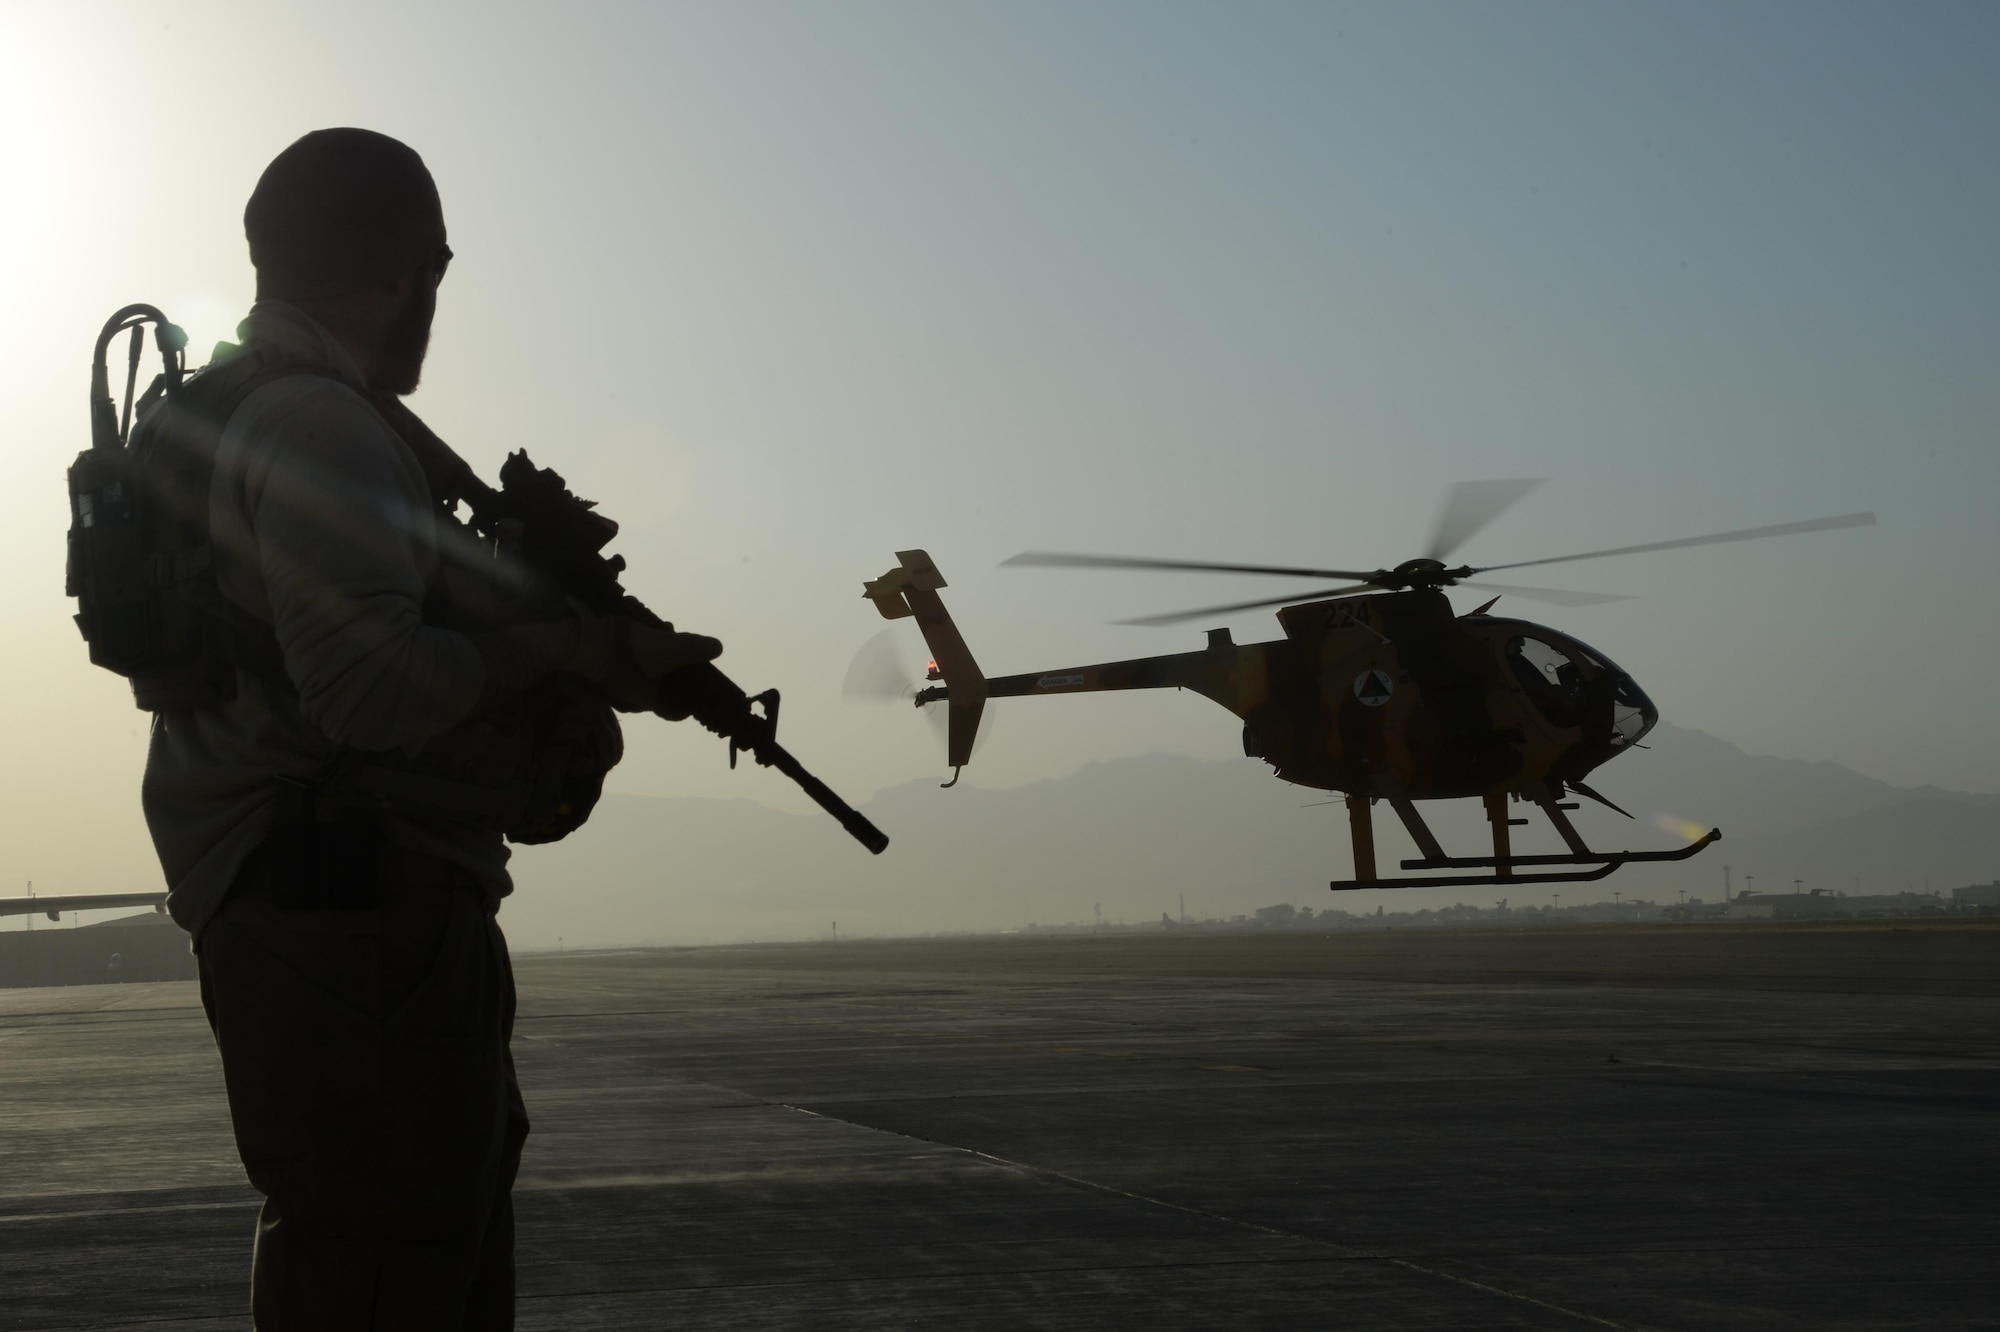 A U.S. Army Train, Advise, Assist Command – Air (TAAC-Air) personal security detail shift lead, provides security while an MD-530 Cayuse Warrior, or “Jengi” in Dari, takes off with an all-Afghan combat mission Sept. 27, 2015.  The crews flew out of Hamid Karzai International Airport, Kabul, Afghanistan. The “Jengi” is a light-lift, highly maneuverable attack helicopter used for high altitude operations. (U.S. Air Force photo by Staff Sgt. Sandra Welch/released)